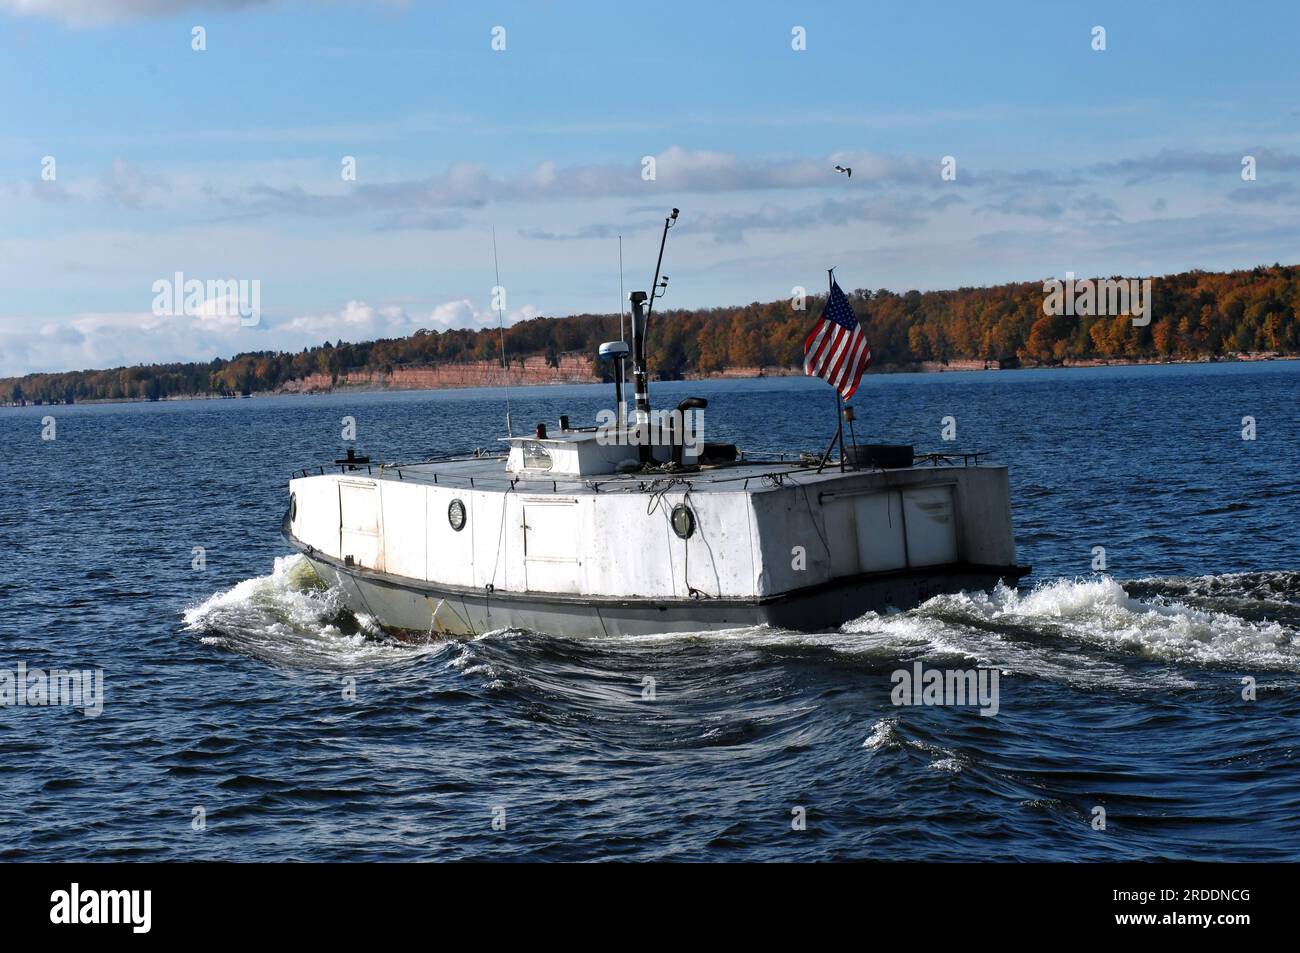 Rustic fishing vessel, locally dubbed the Finish Submarine, motors across the choppy waters of Lake Superior near the South entry of the Portage Canal Stock Photo